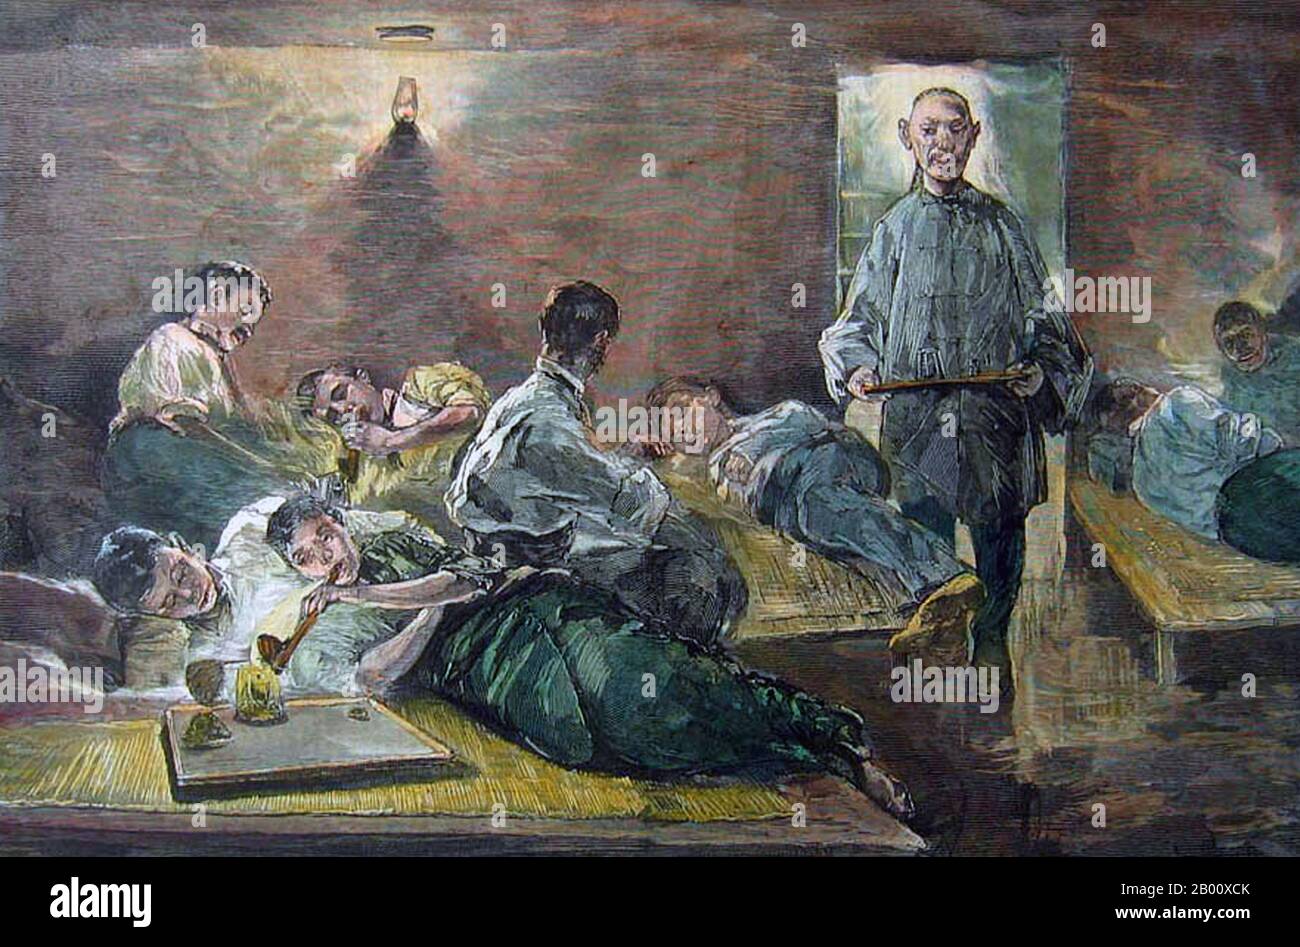 USA: 'American Opium Smokers - interior of a New York Opium Den'. Engraving by John White Alexander (1856-1915), 1881.  Hand-coloured engraved image titled 'American Opium Smokers-Interior of a New York Opium Den', drawn by J. W. Alexander for Harper's Weekly. Stock Photo